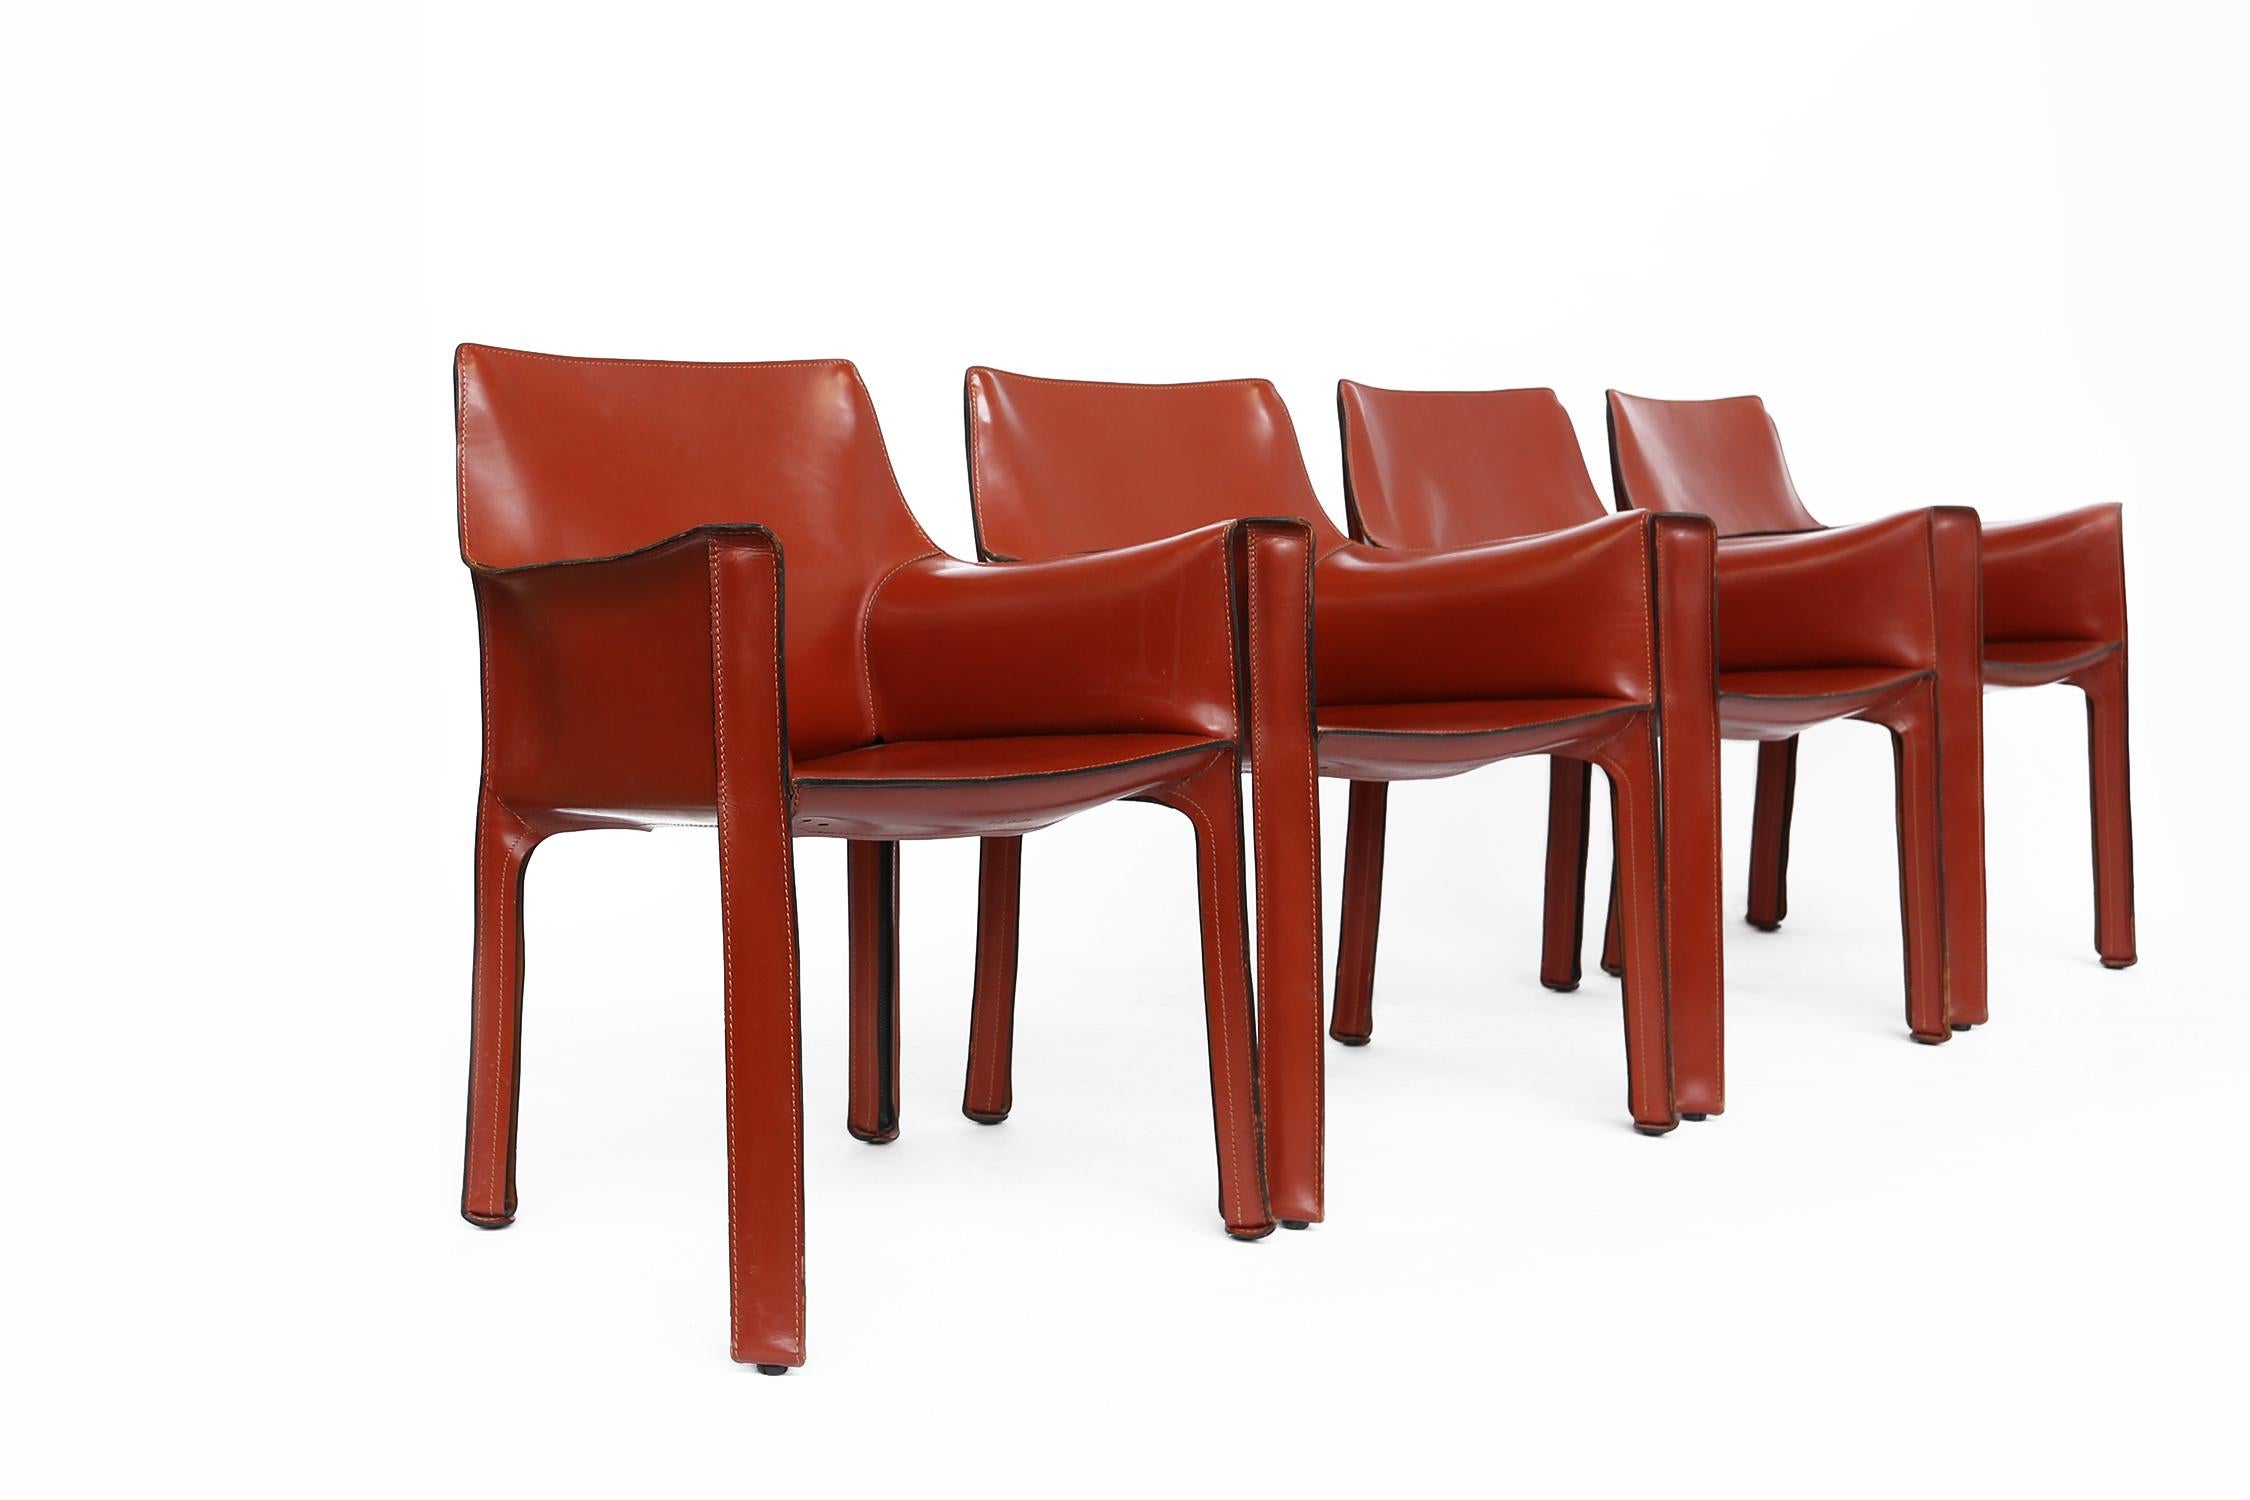 Set of four Cab 413 armchairs in burgundy leather by Mario Bellini for Cassina.
These chairs are built up with a tubular frame over which thick saddle leather is fitted. The leather skin is kept in place with zippers on the inside legs.
A